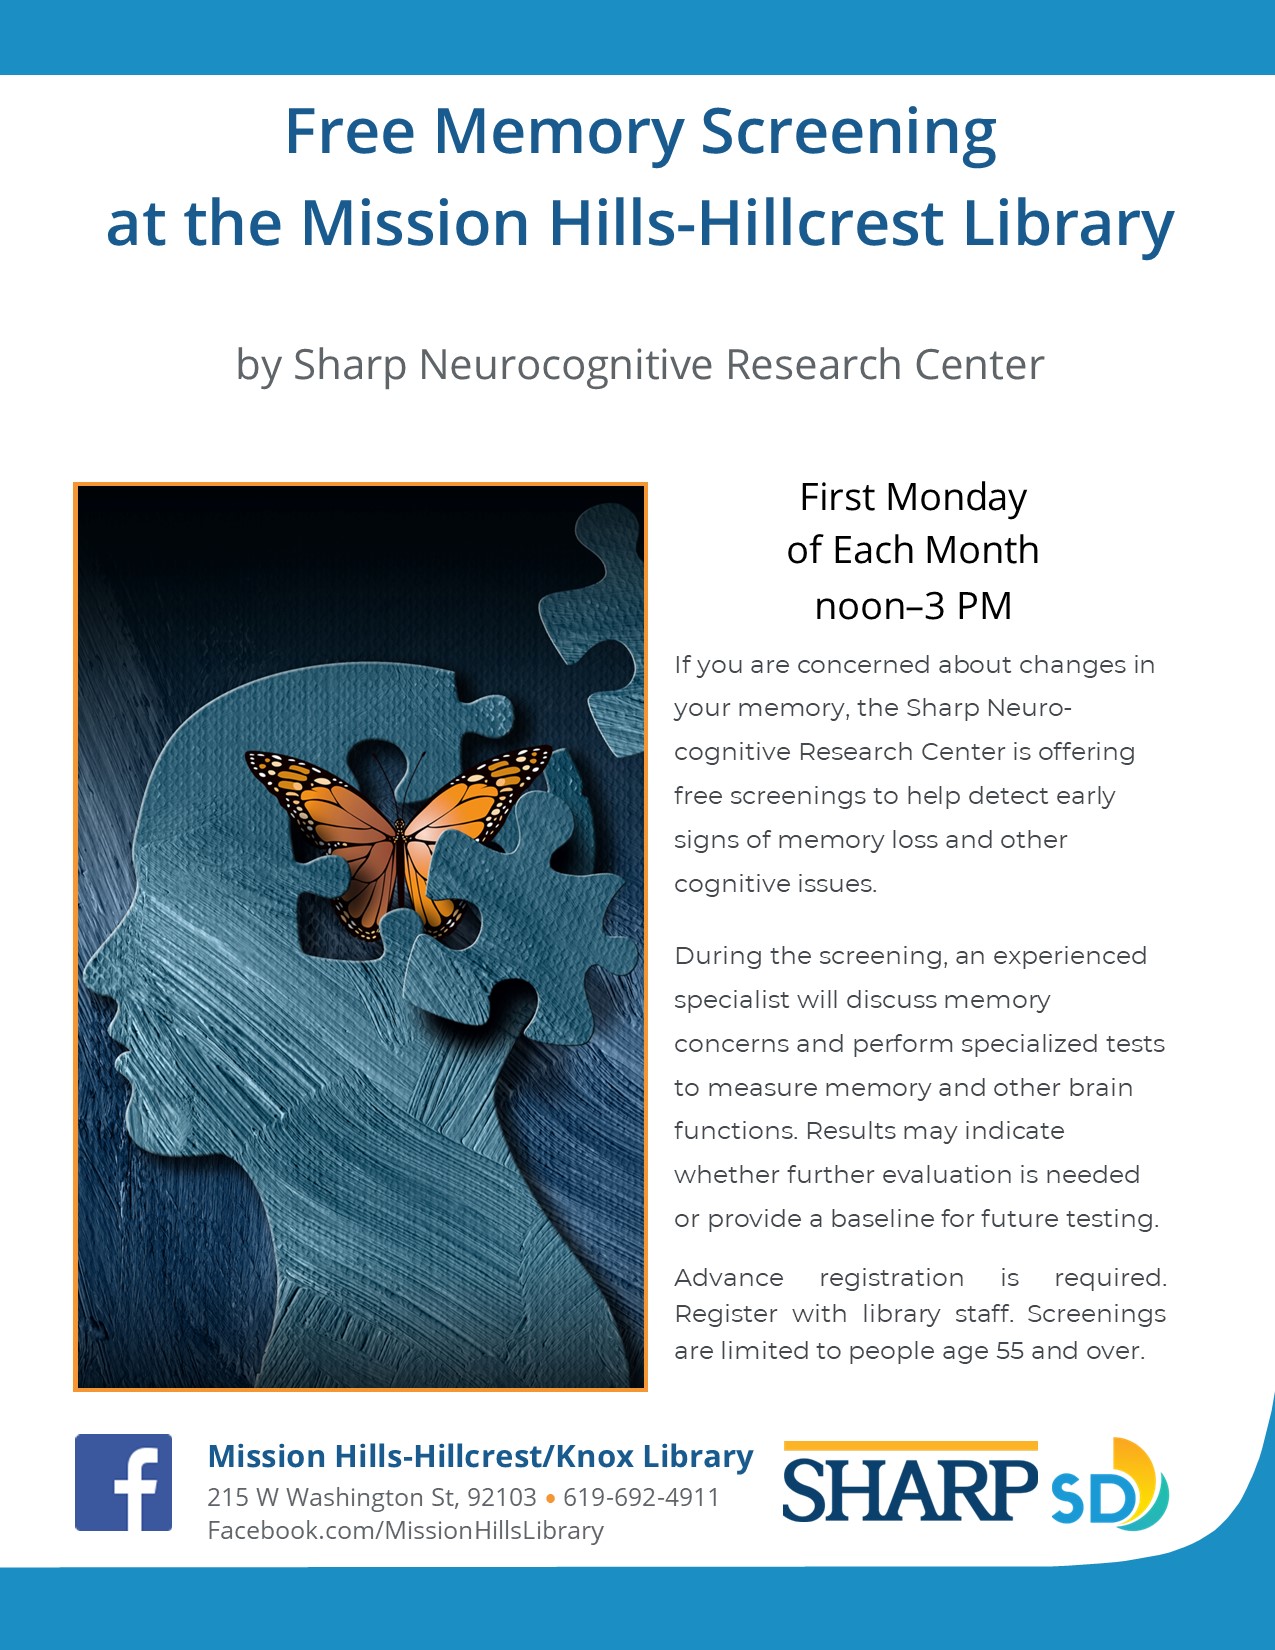 Flyer with information on memory screenings, including illustration of head and butterfly